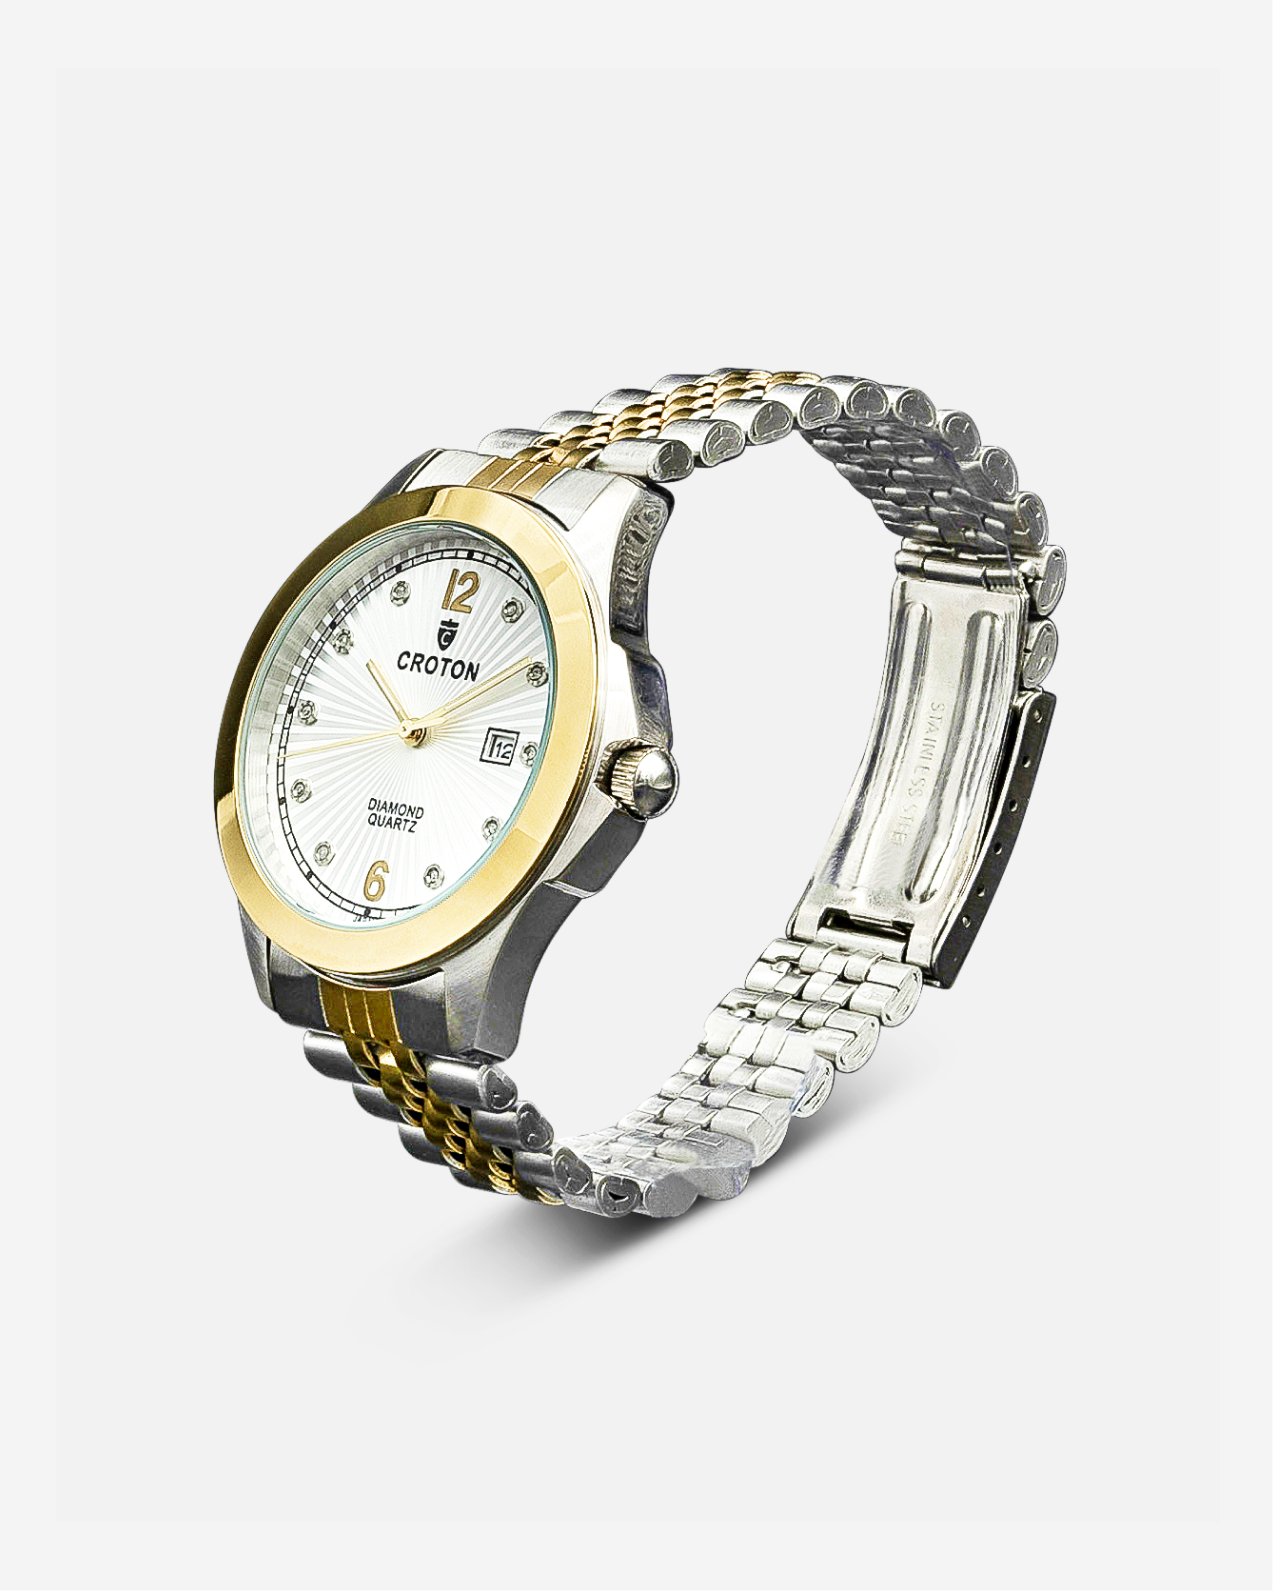 DECIDER Croton's Men's Stainless Steel Watch with Diamond Markers